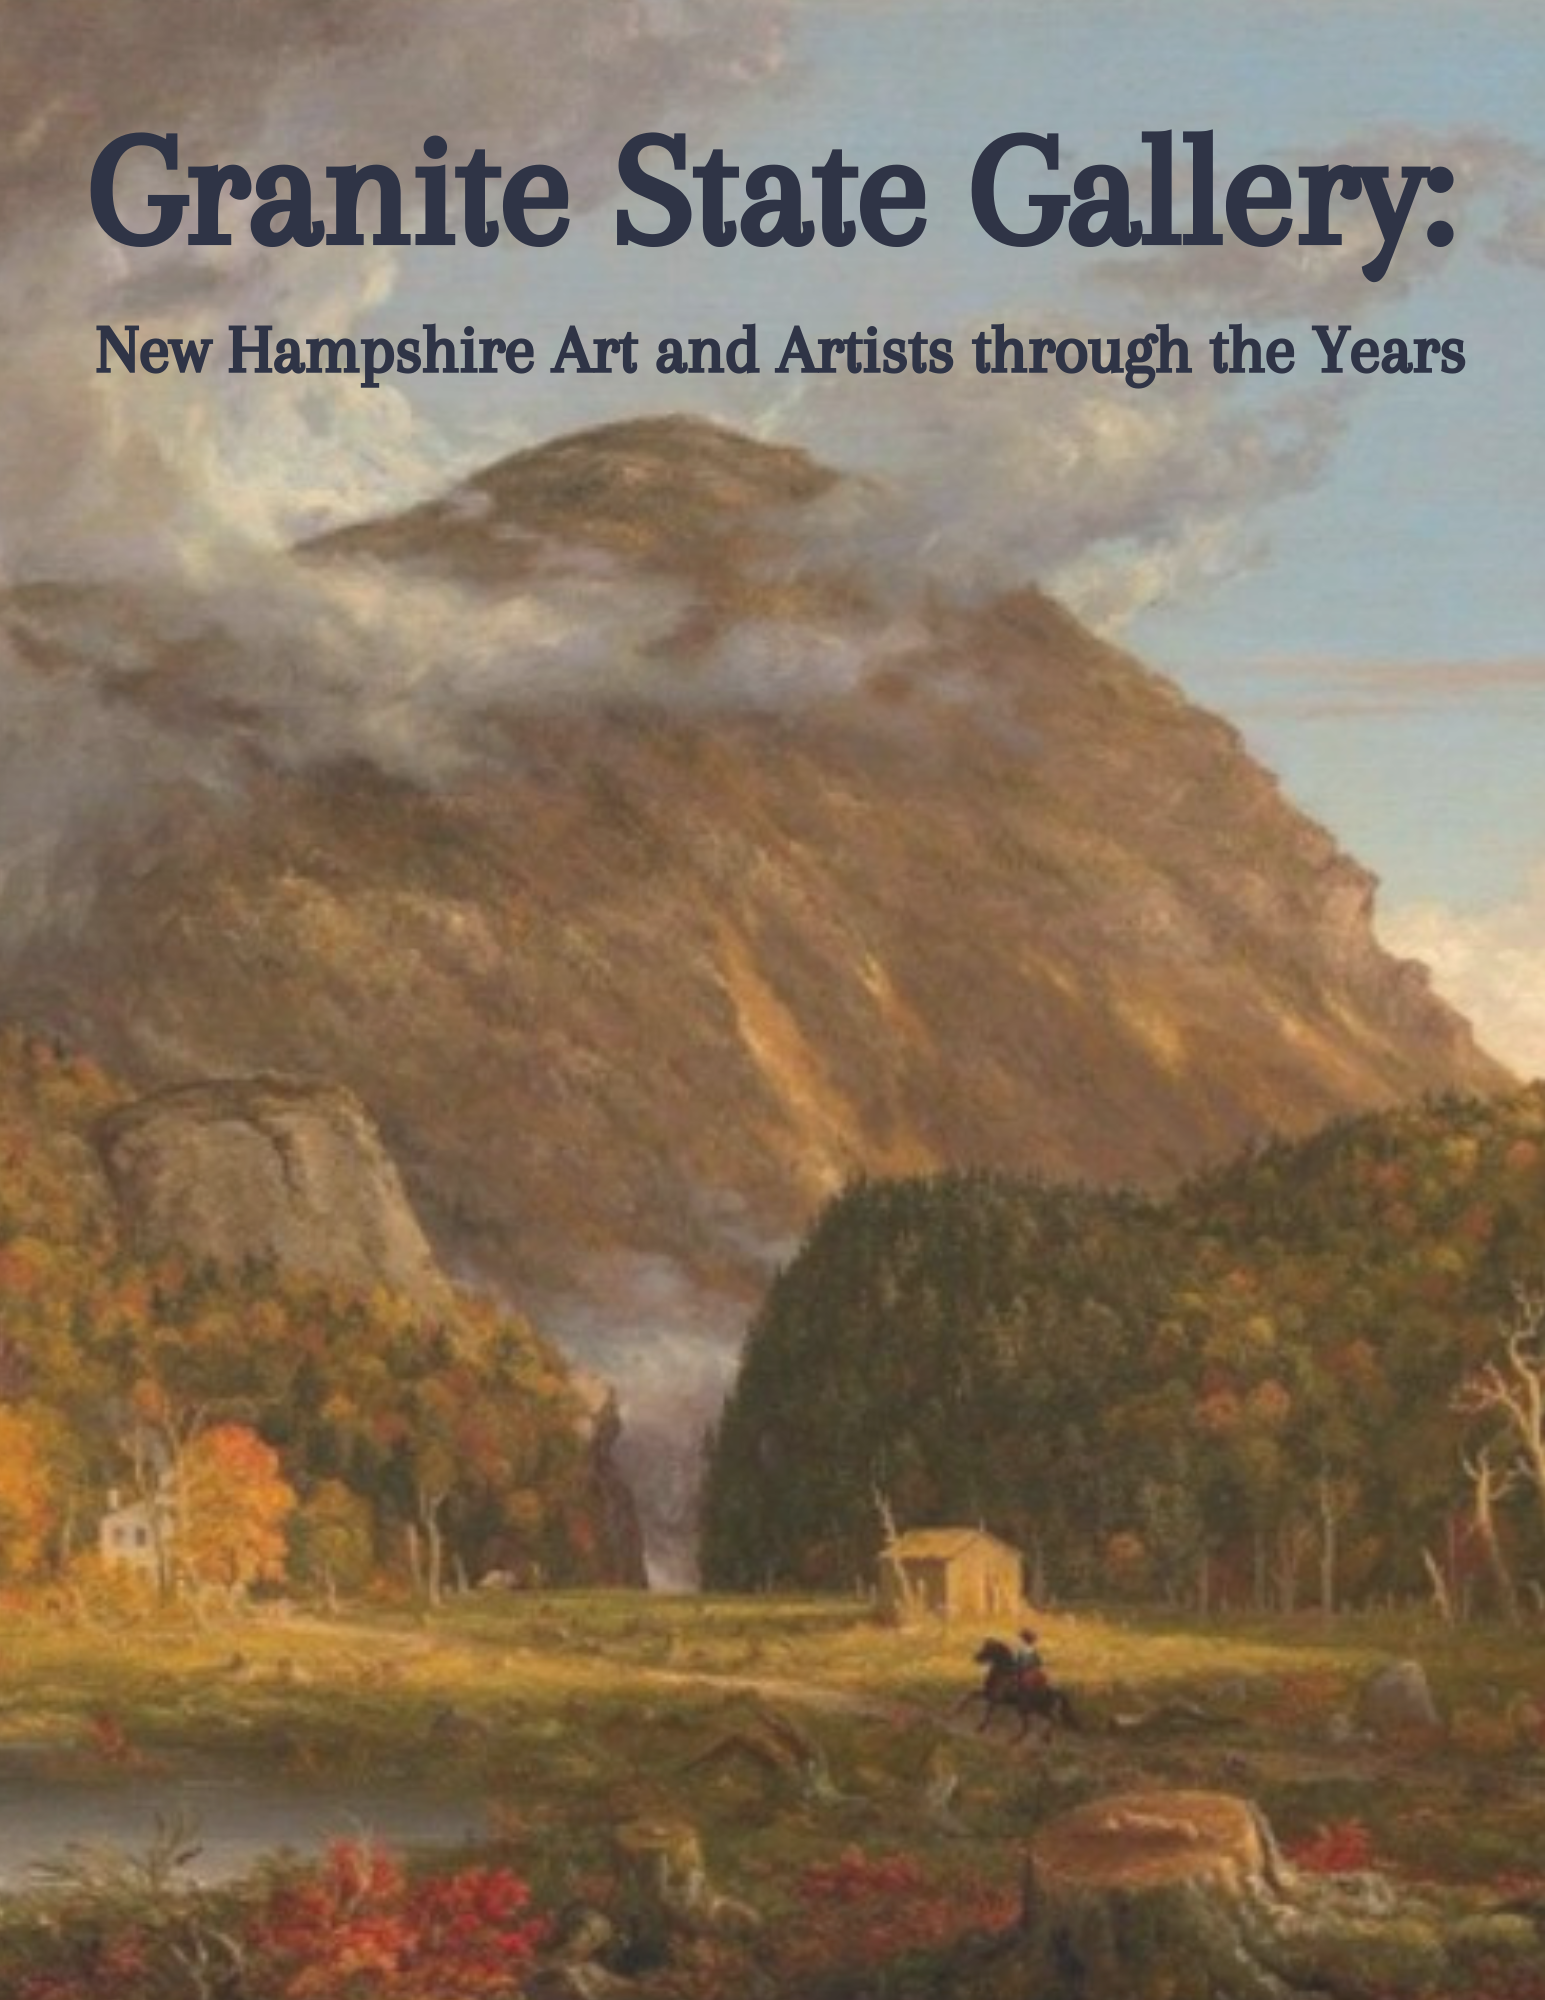 Granite State Gallery: New Hampshire Art and Artists Through the Years Mountain with cabin in foreground